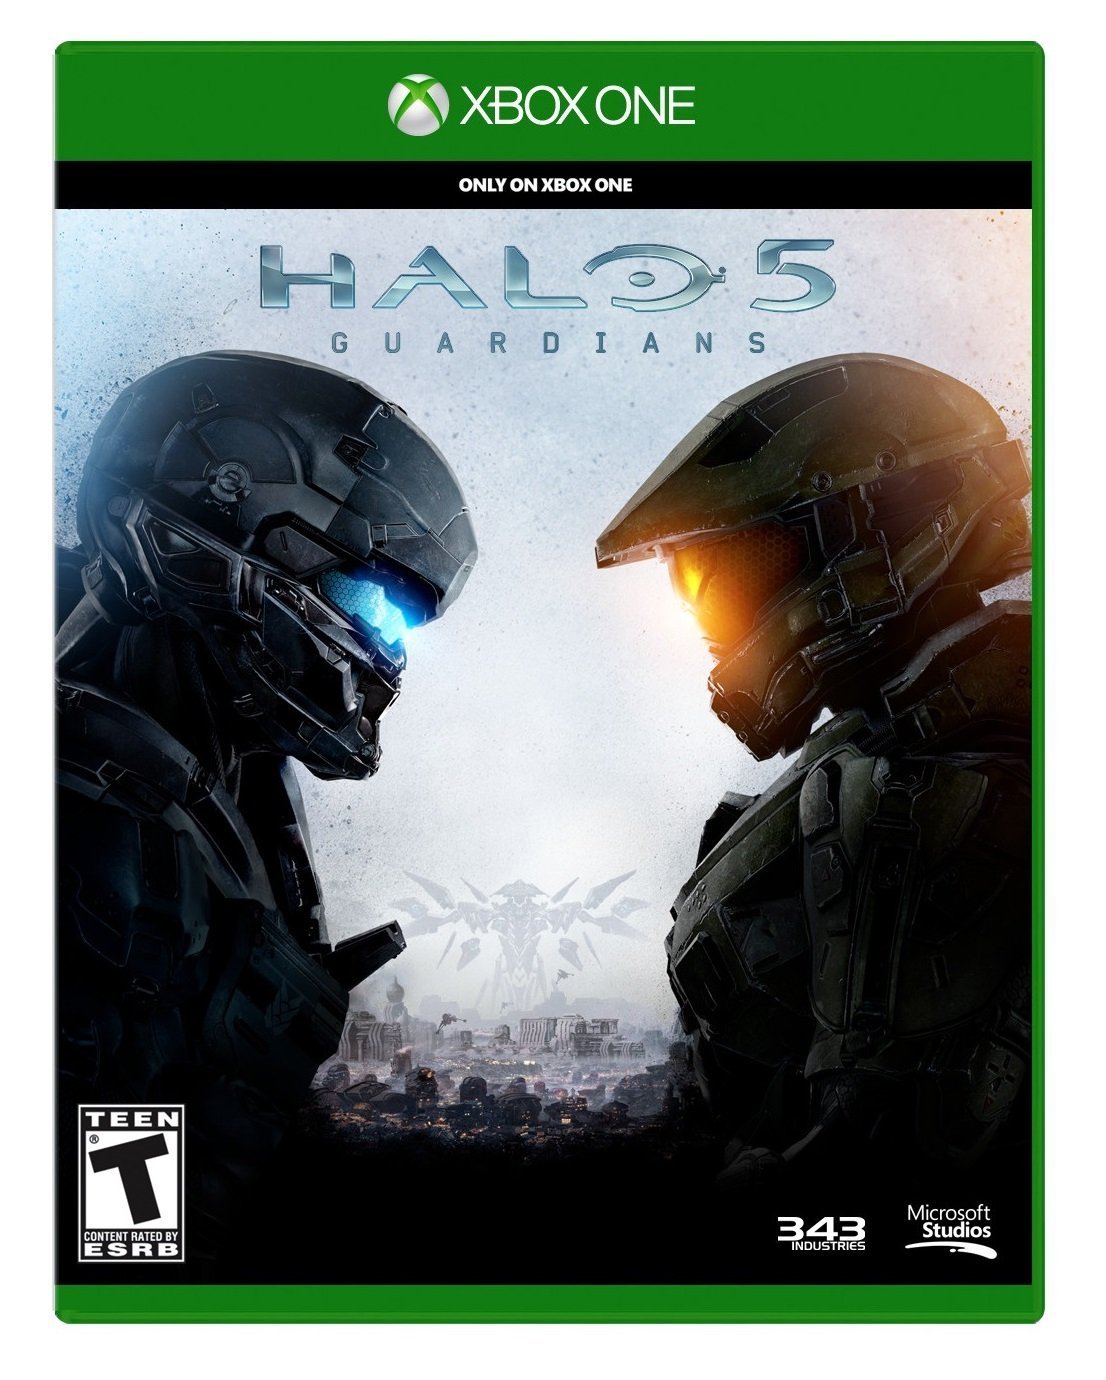 Halo 5: Guardians Limited Edition Collector's Edition – Xbox One [Digital  Code Only, No Disc Included]